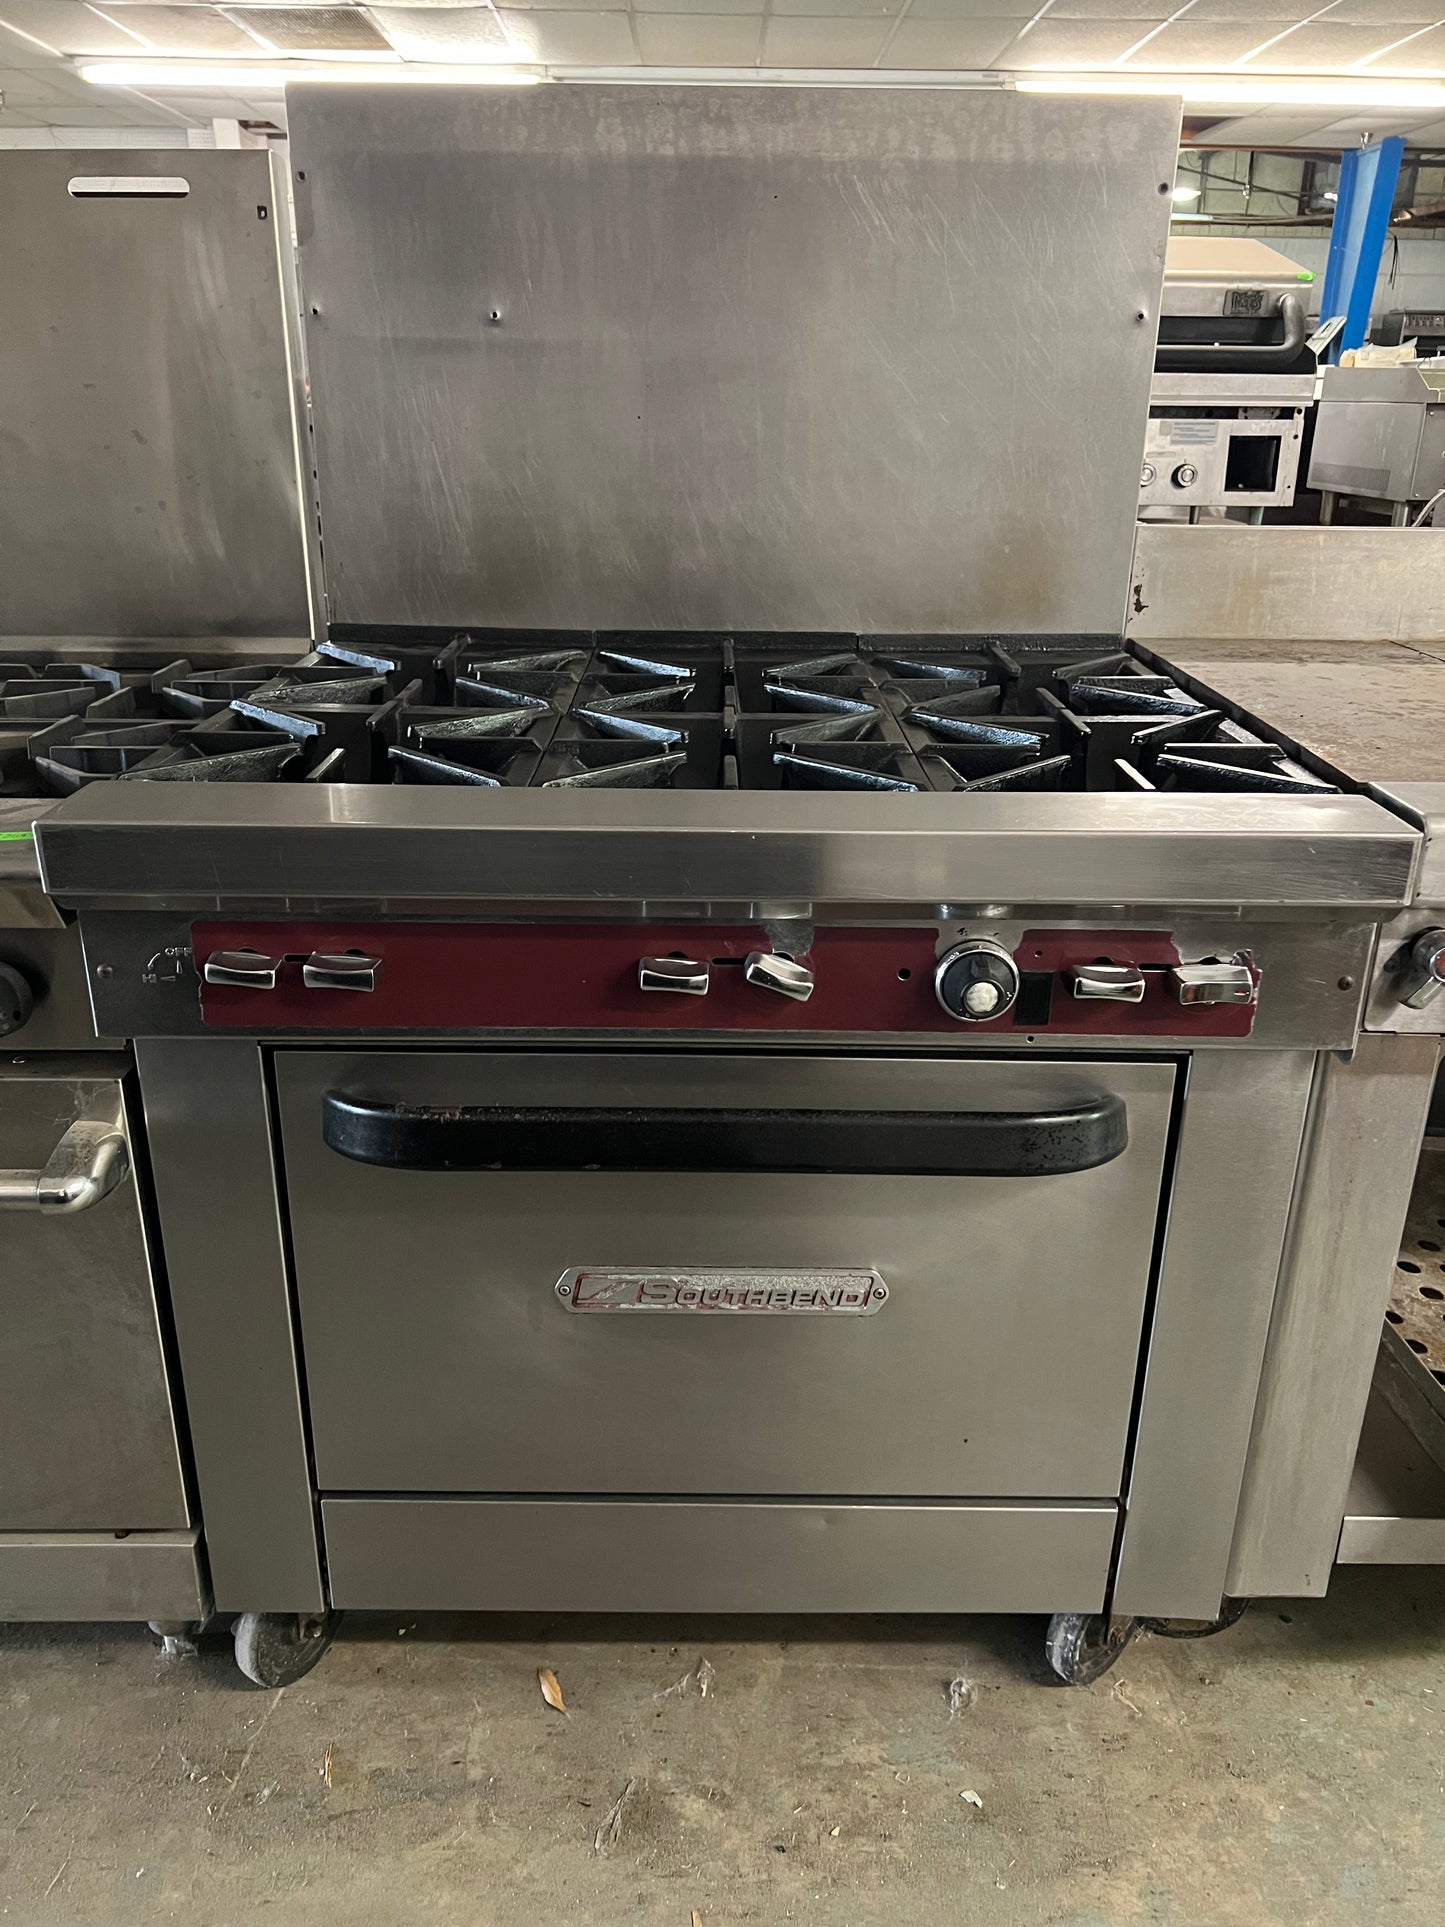 Southbend 6 Burner Gas Range with Oven X336D